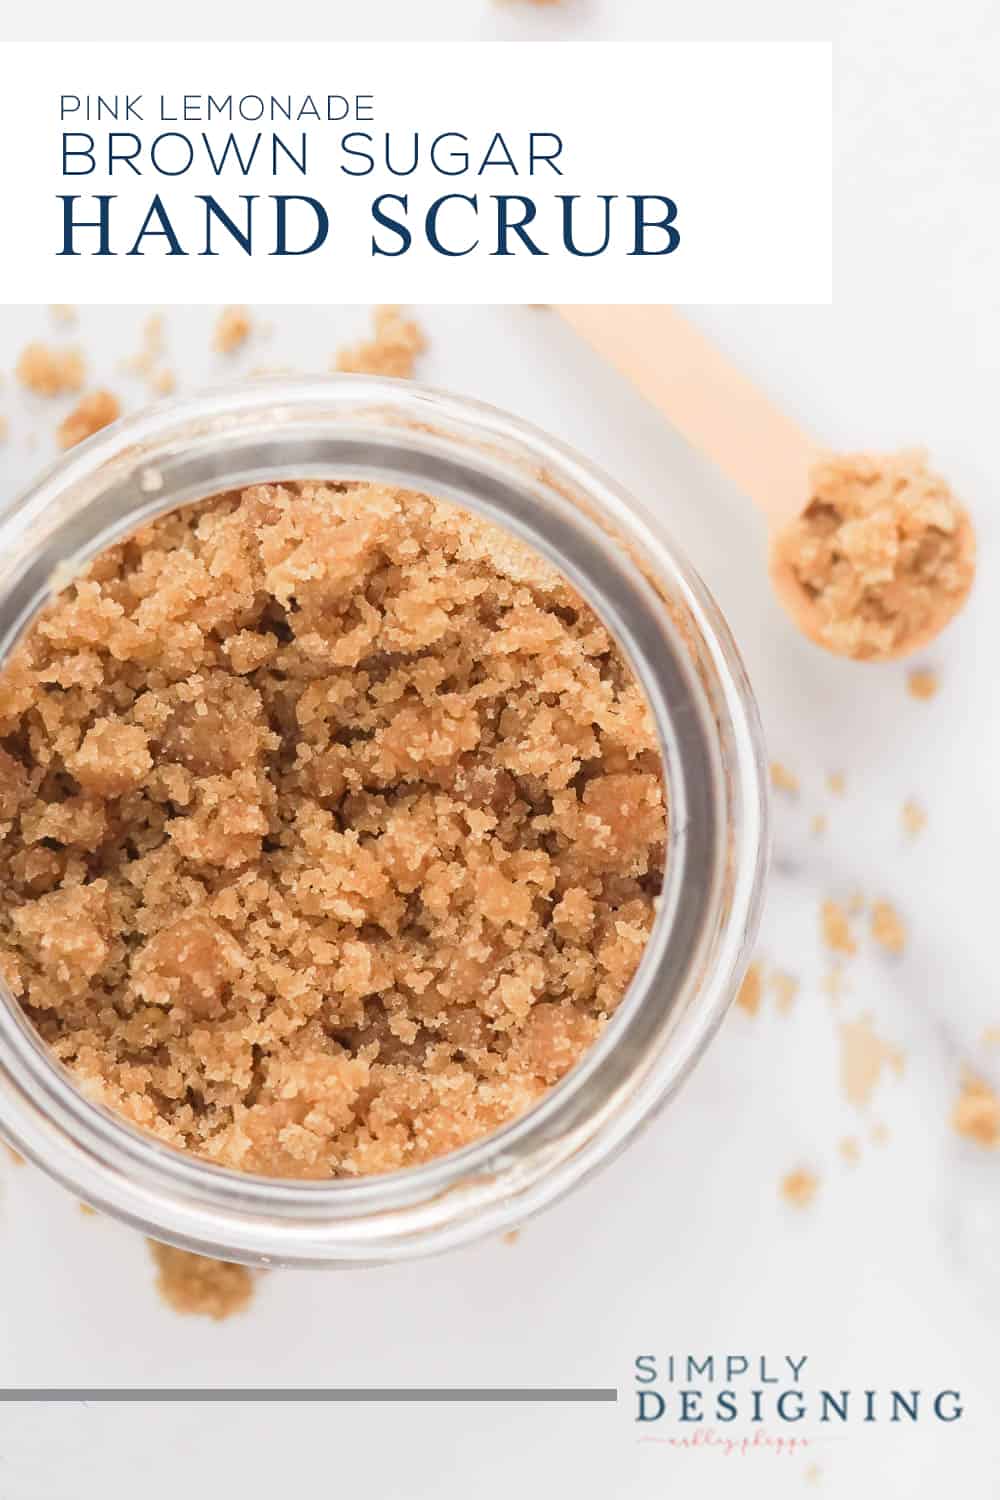 This Brown Sugar Hand Scrub recipe is the perfect way to exfoliate your hands with all-natural ingredients at a fraction of the cost of store-bought